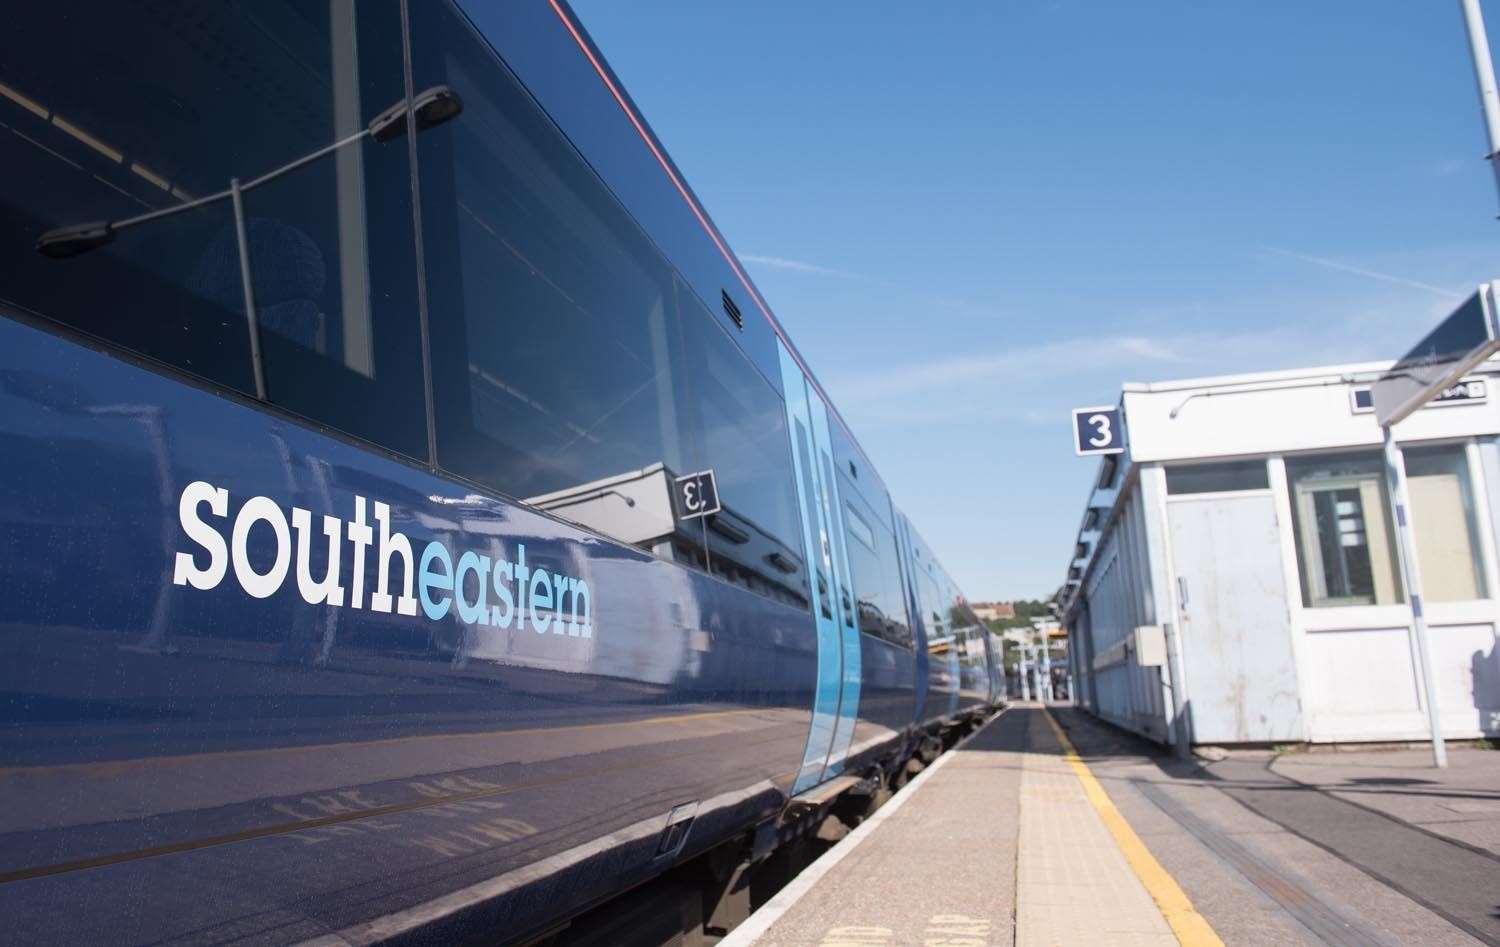 Southeastern says the changes will improve punctuality and cut down the number of cancellations